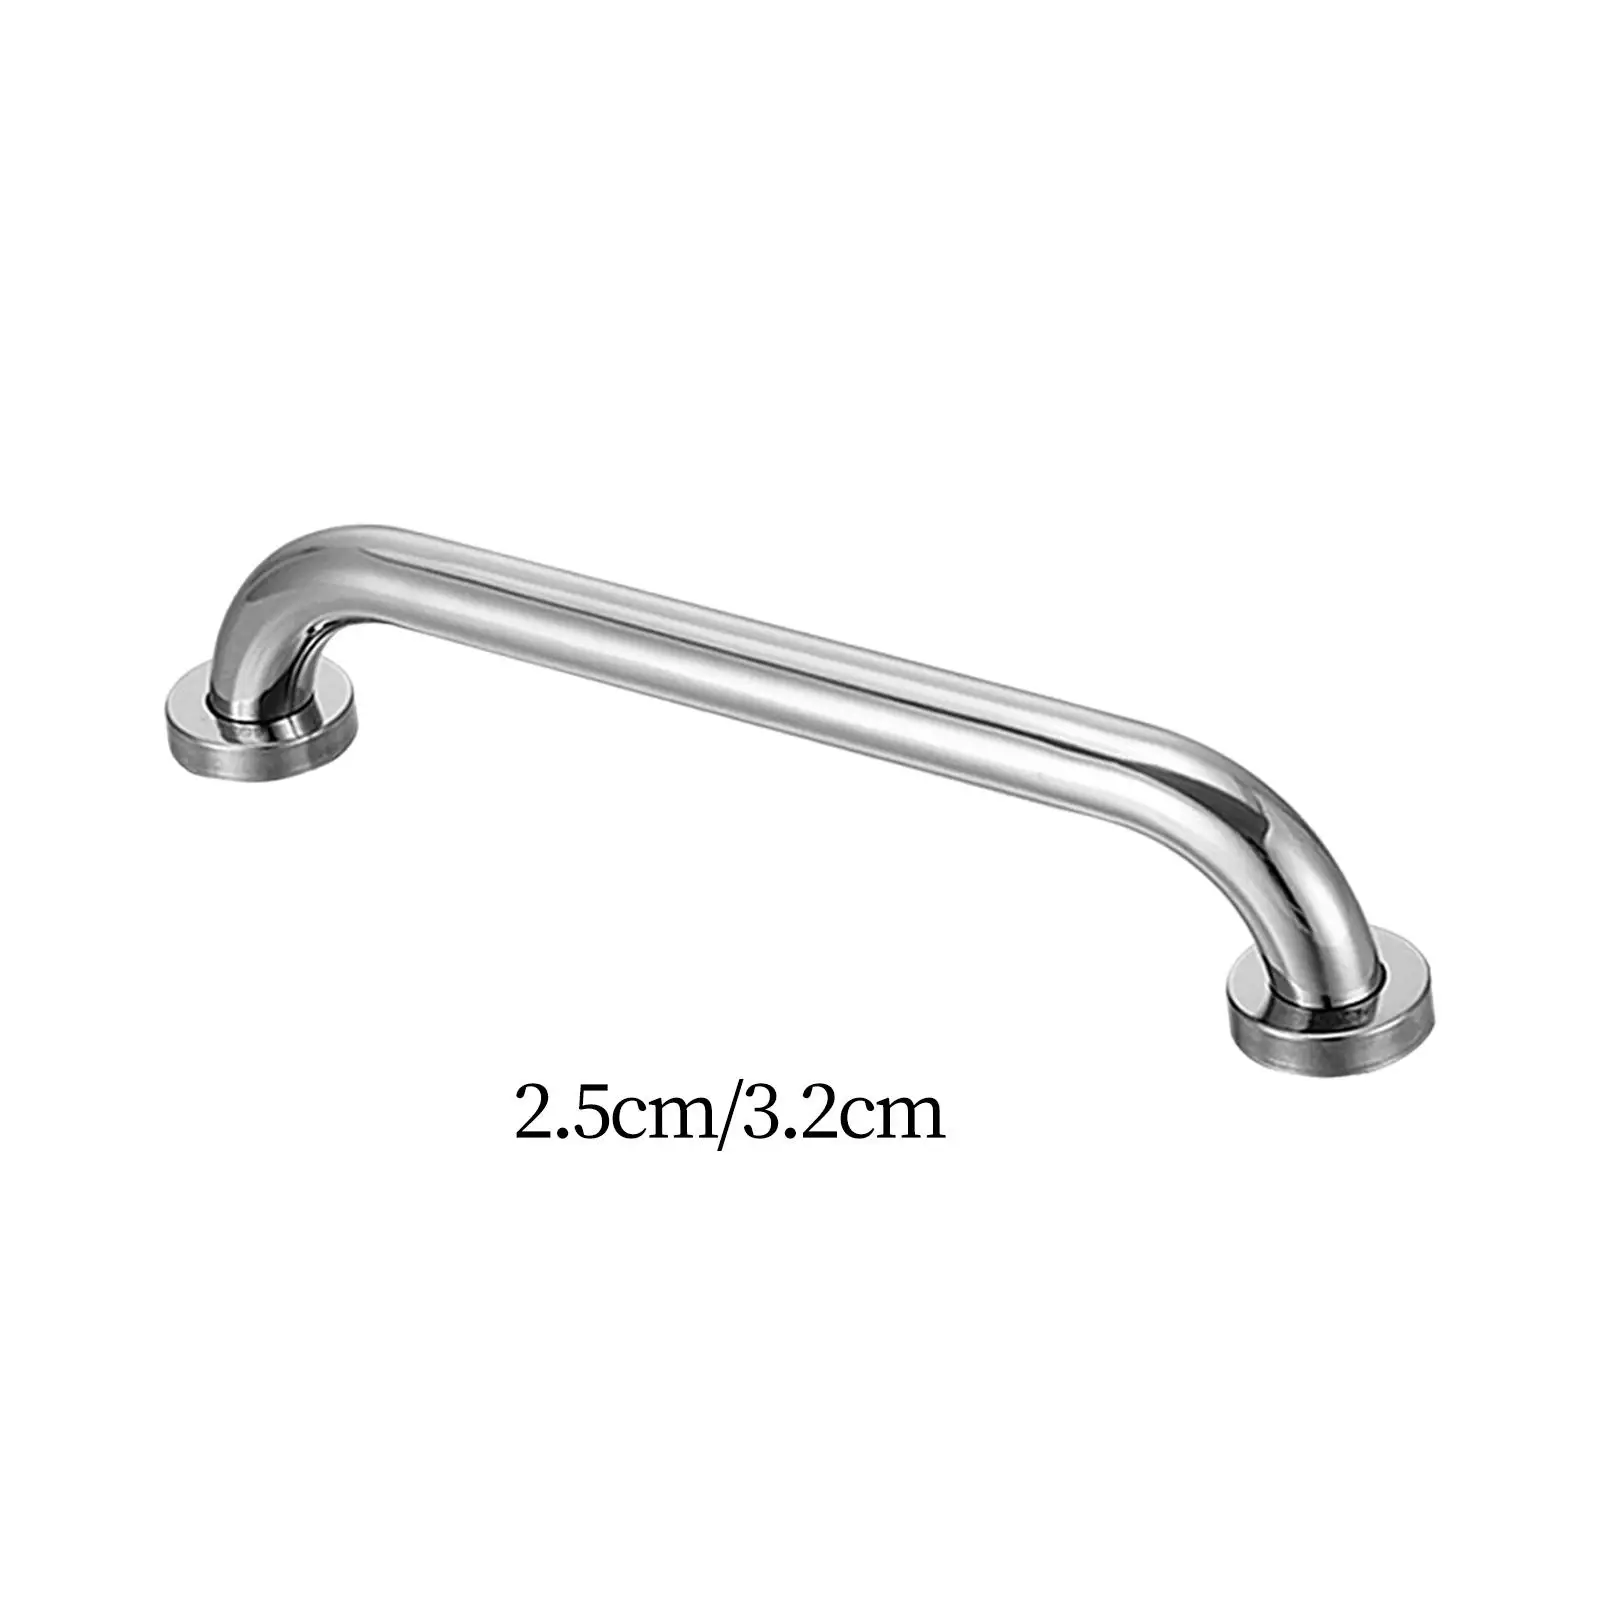 Grab Bar for Bathroom with Concealed Screws 24inch Hand Rail Support for Tub Toilet Seniors